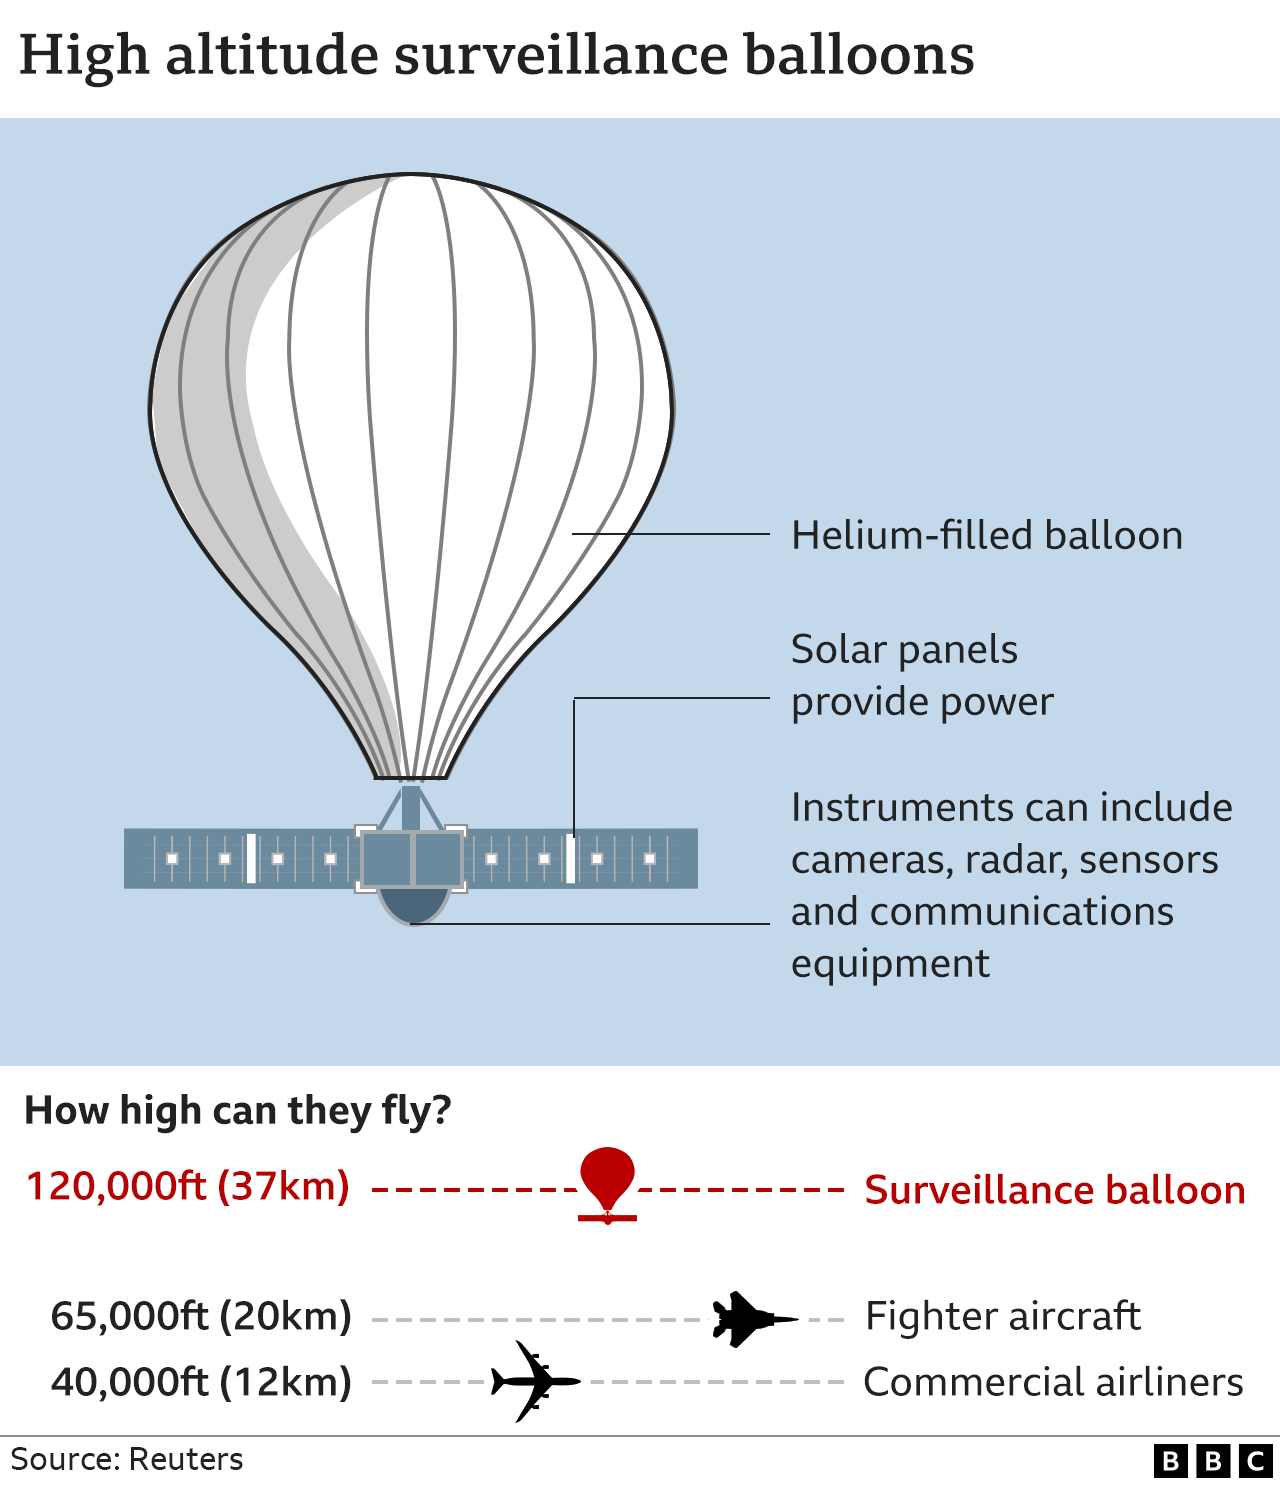 Graphic showing a high-altitude balloon and how high it can fly compared with fighter jets and civilian aircraft